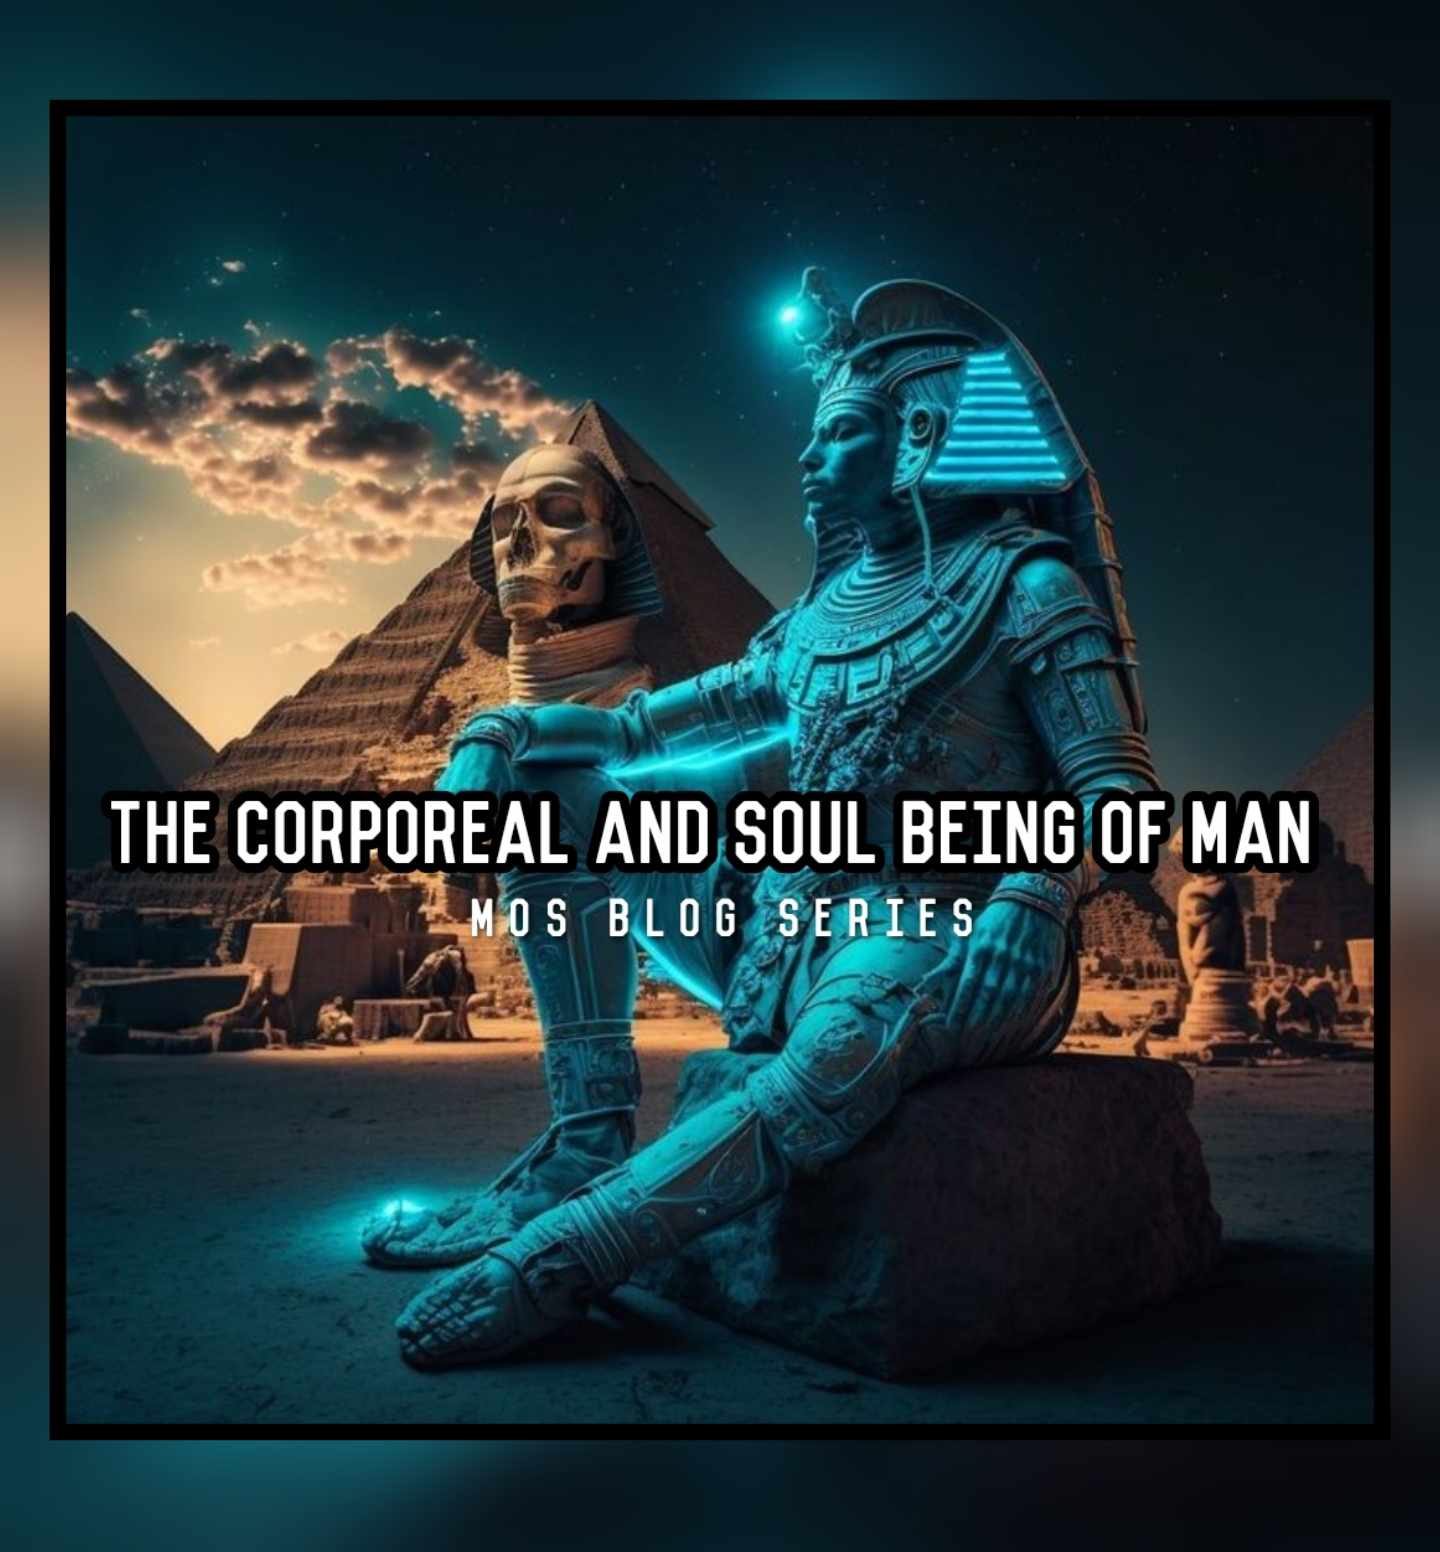 The Corporeal and Soul Being of Man